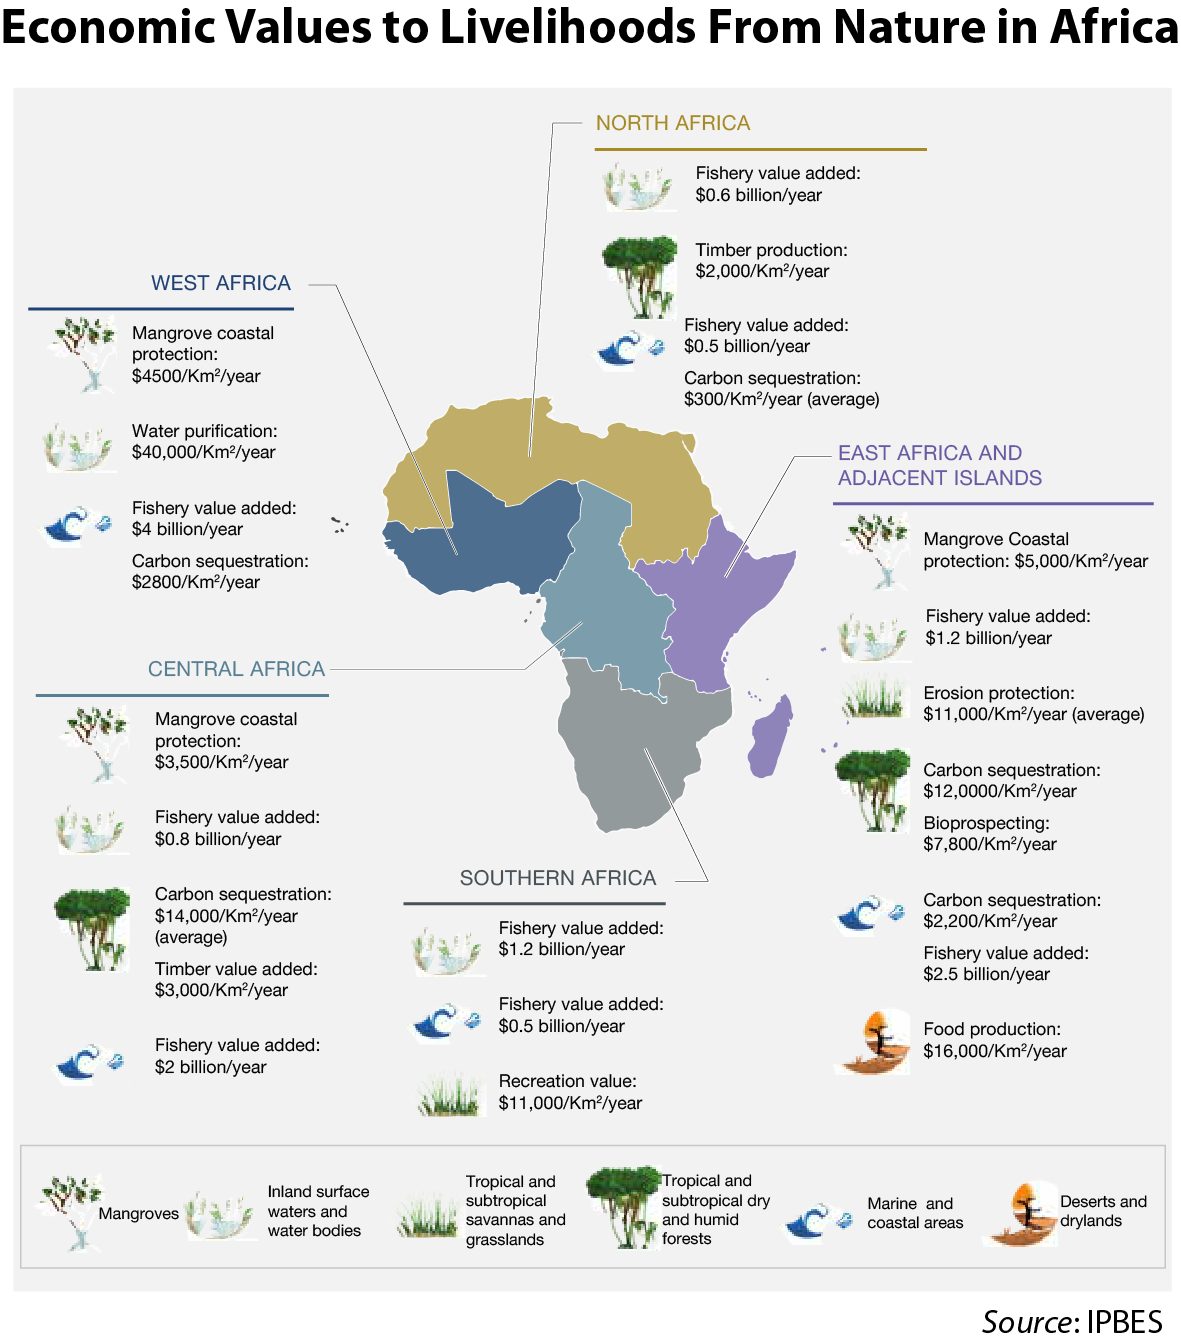 Economic Values to Livelihoods from Nature in Africa